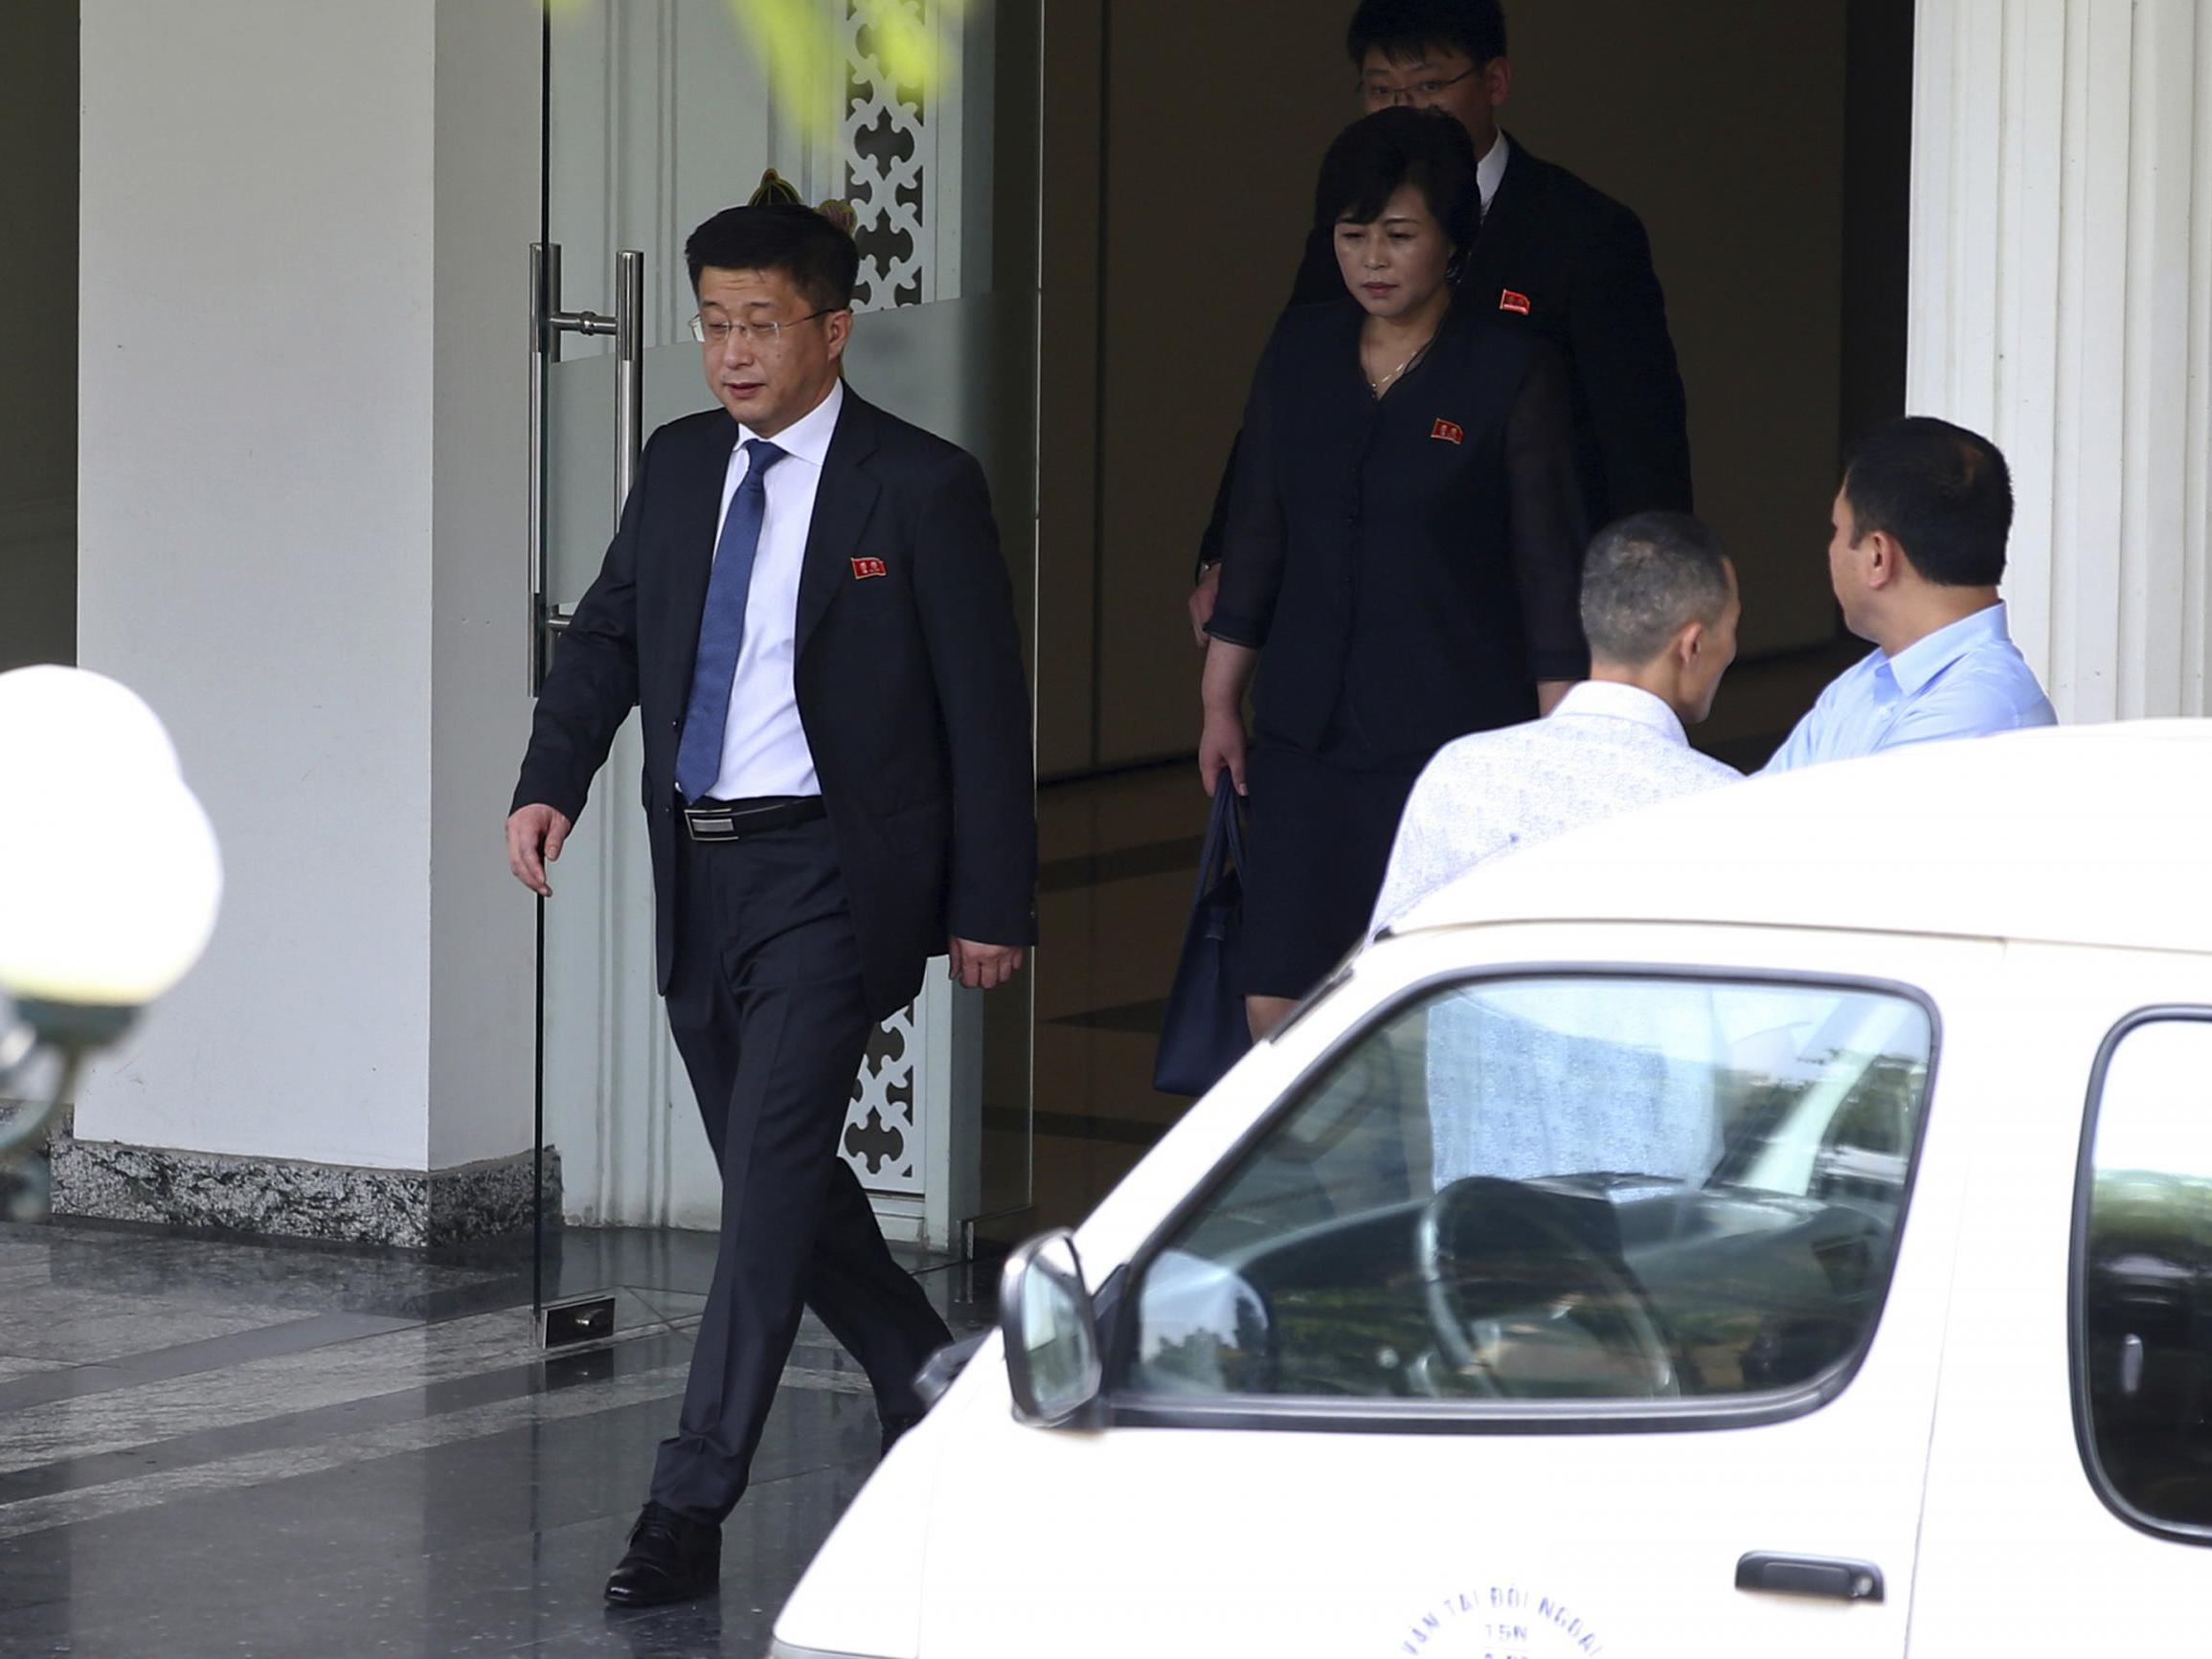 In this 21 February 2019 photo, Kim Hyok-Chol, left, North Korea's special representative for US affairs, leaves the Government Guest House in Hanoi, Vietnam. A South Korean newspaper is reporting that North Korea executed a senior envoy involved in nuclear negotiations with the US as well as four other high-level officials.